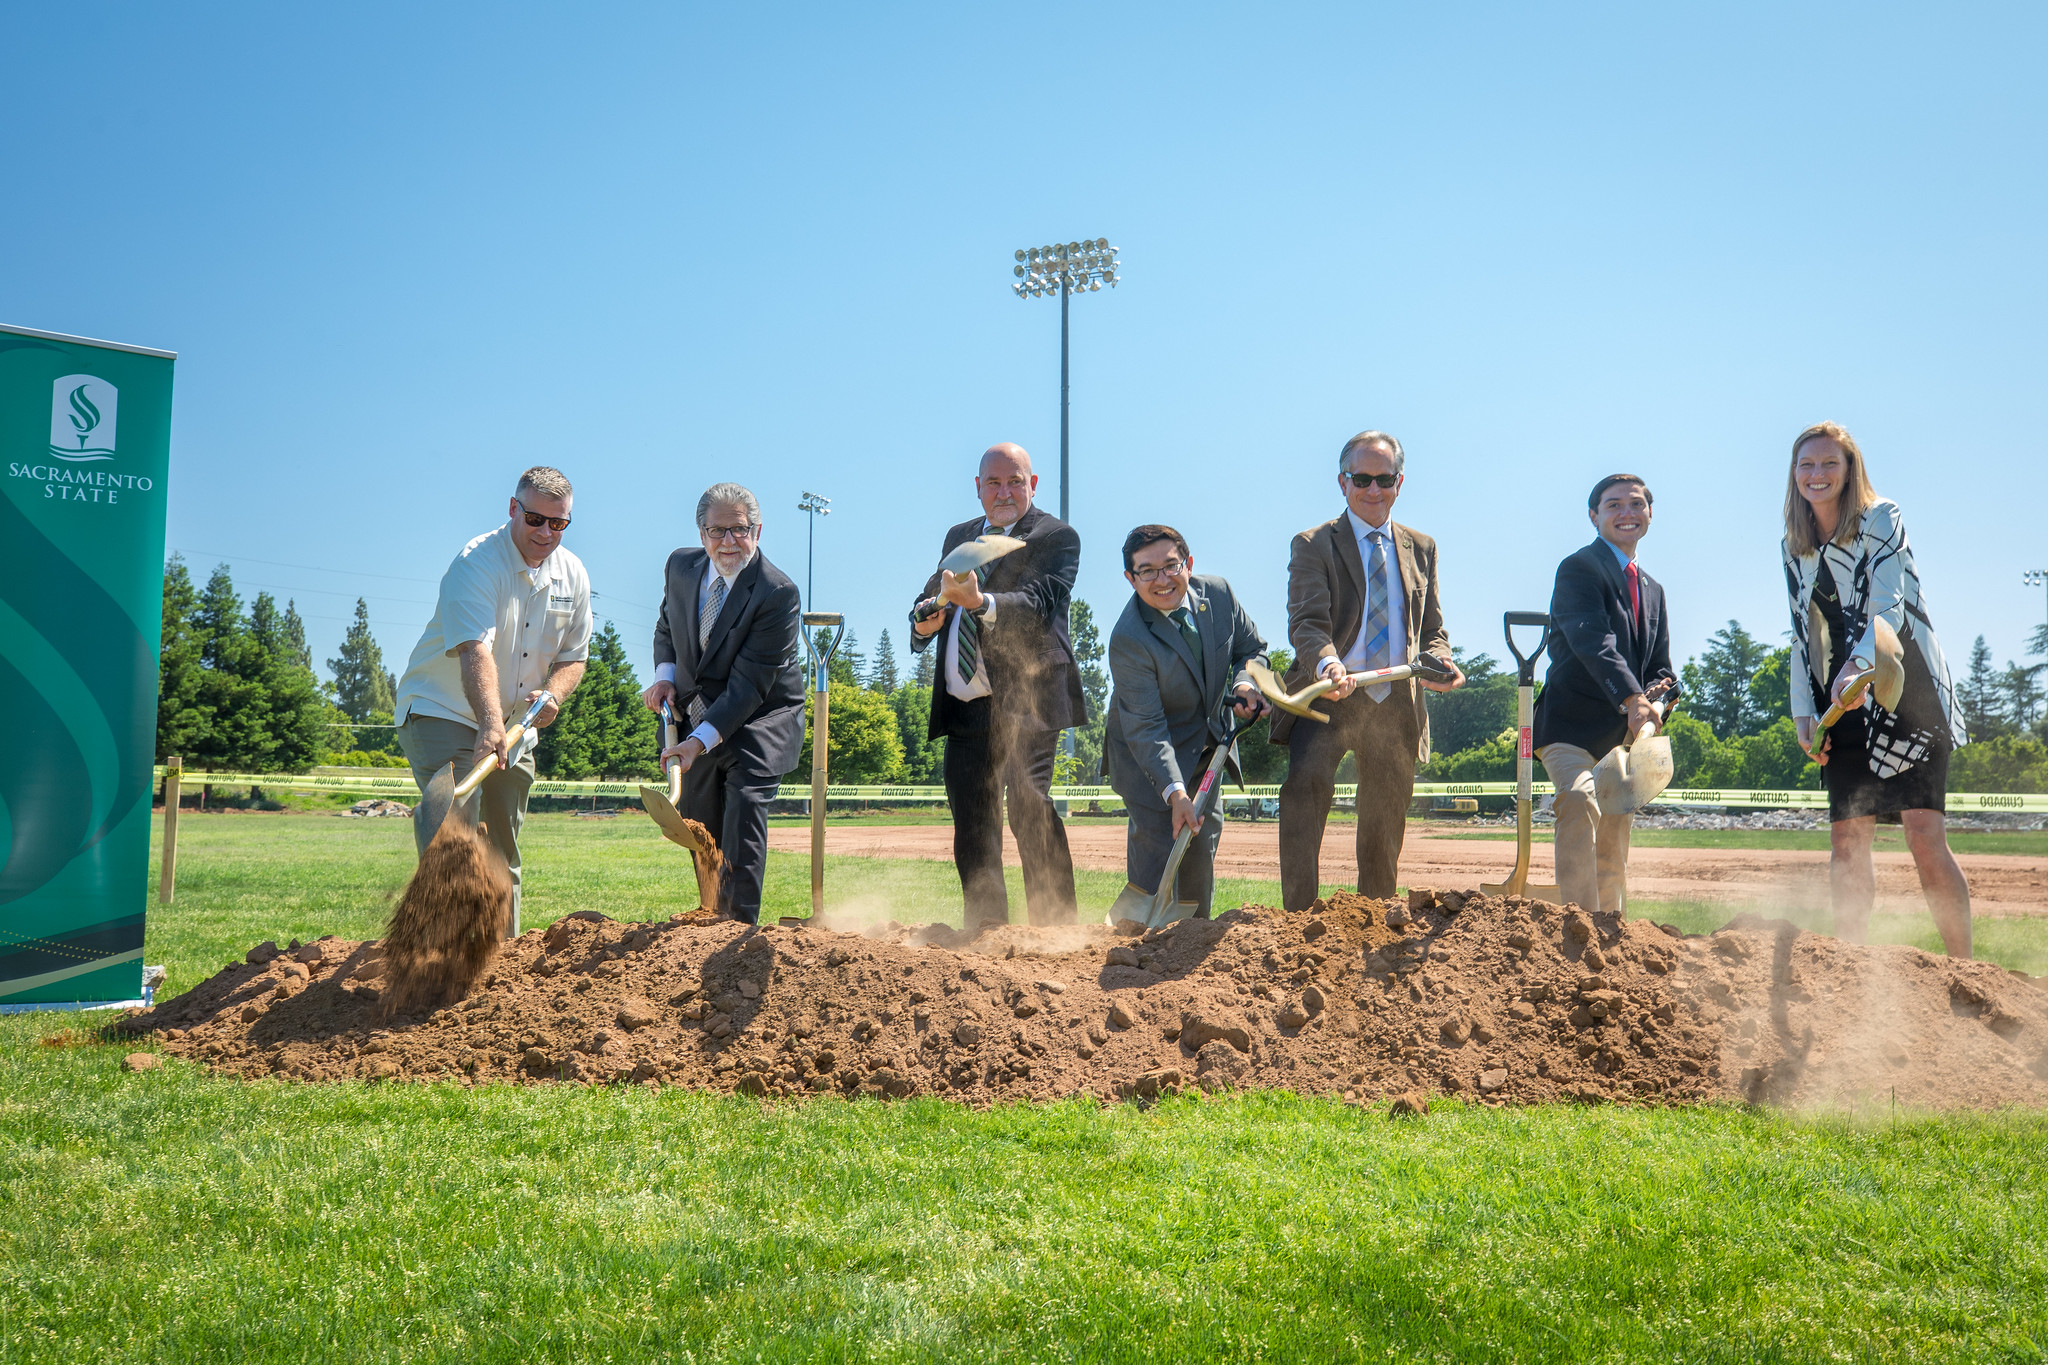 sac state calendar fall 2021 Ceremony Launches Key Sac State Student Housing Project sac state calendar fall 2021